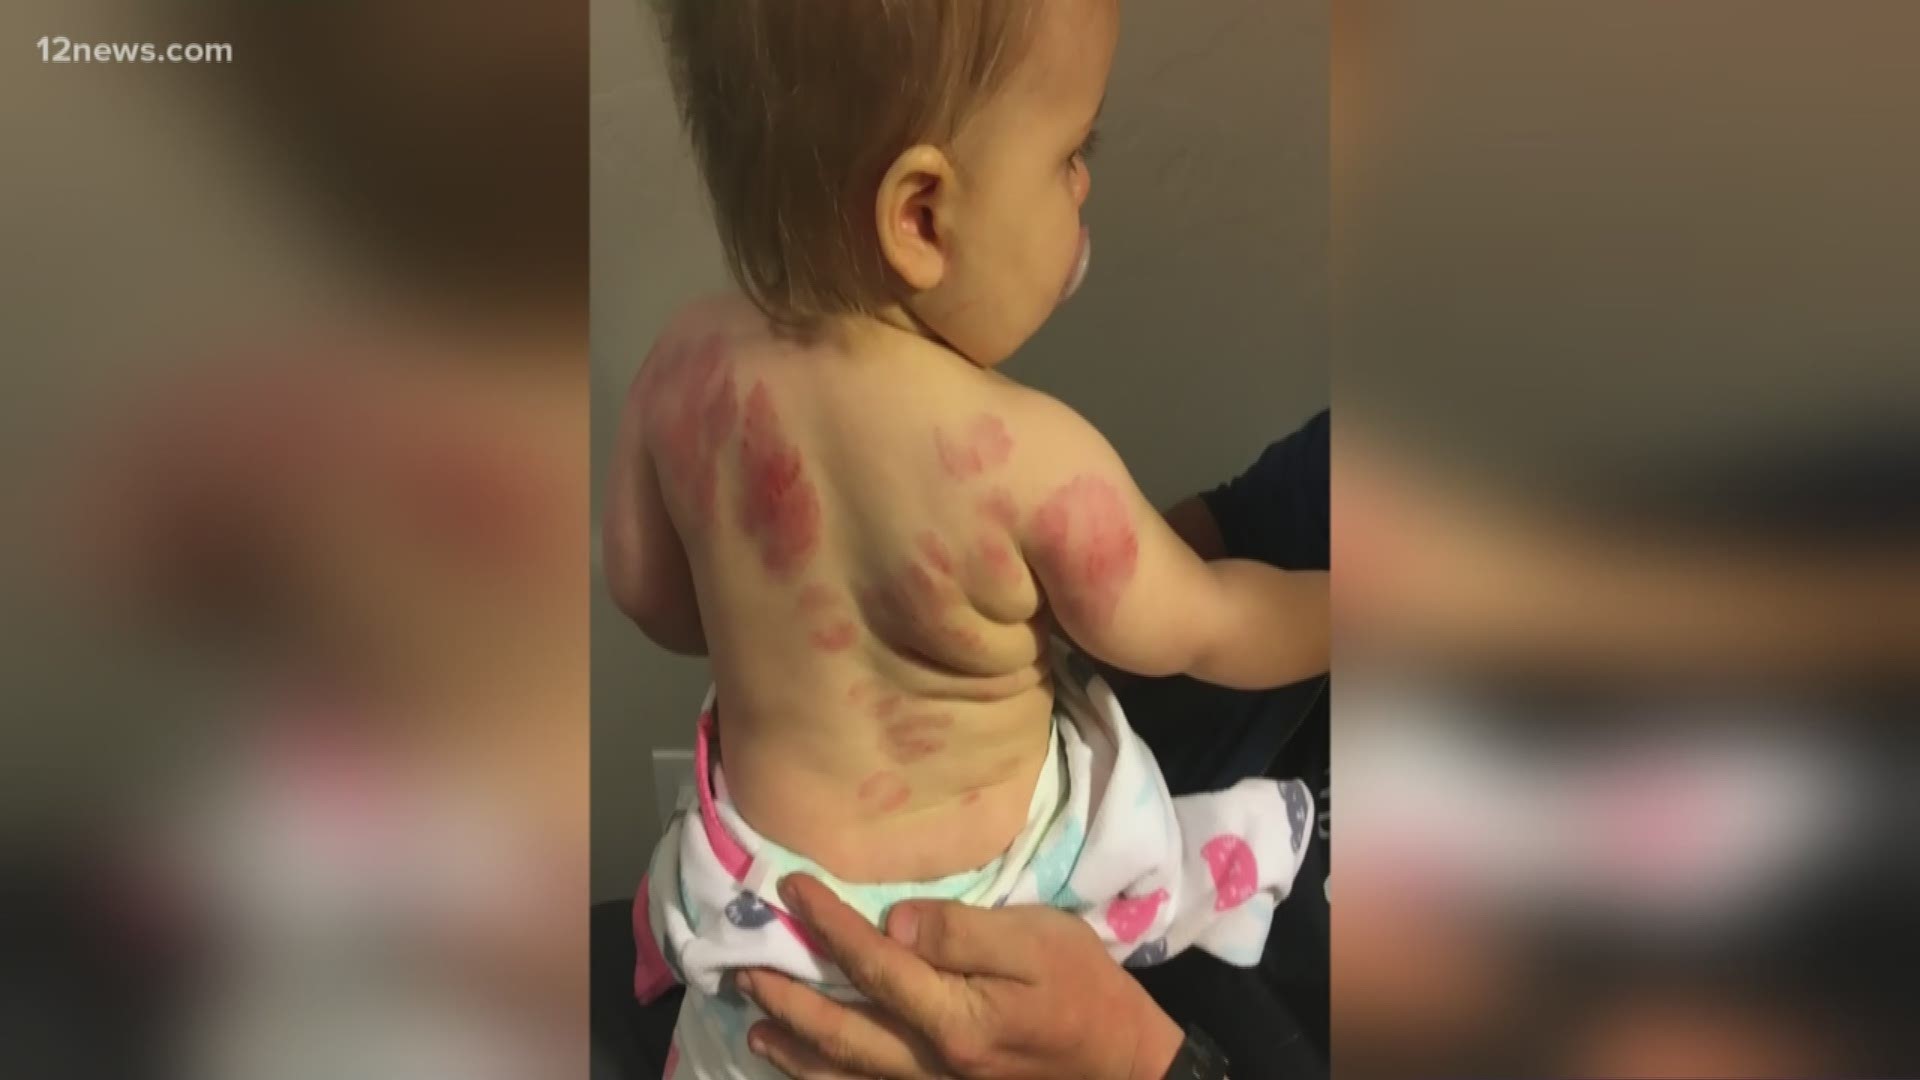 Two families are on alert after their toddlers came home with multiple bite marks in separate incidents at different Arizona day cares.